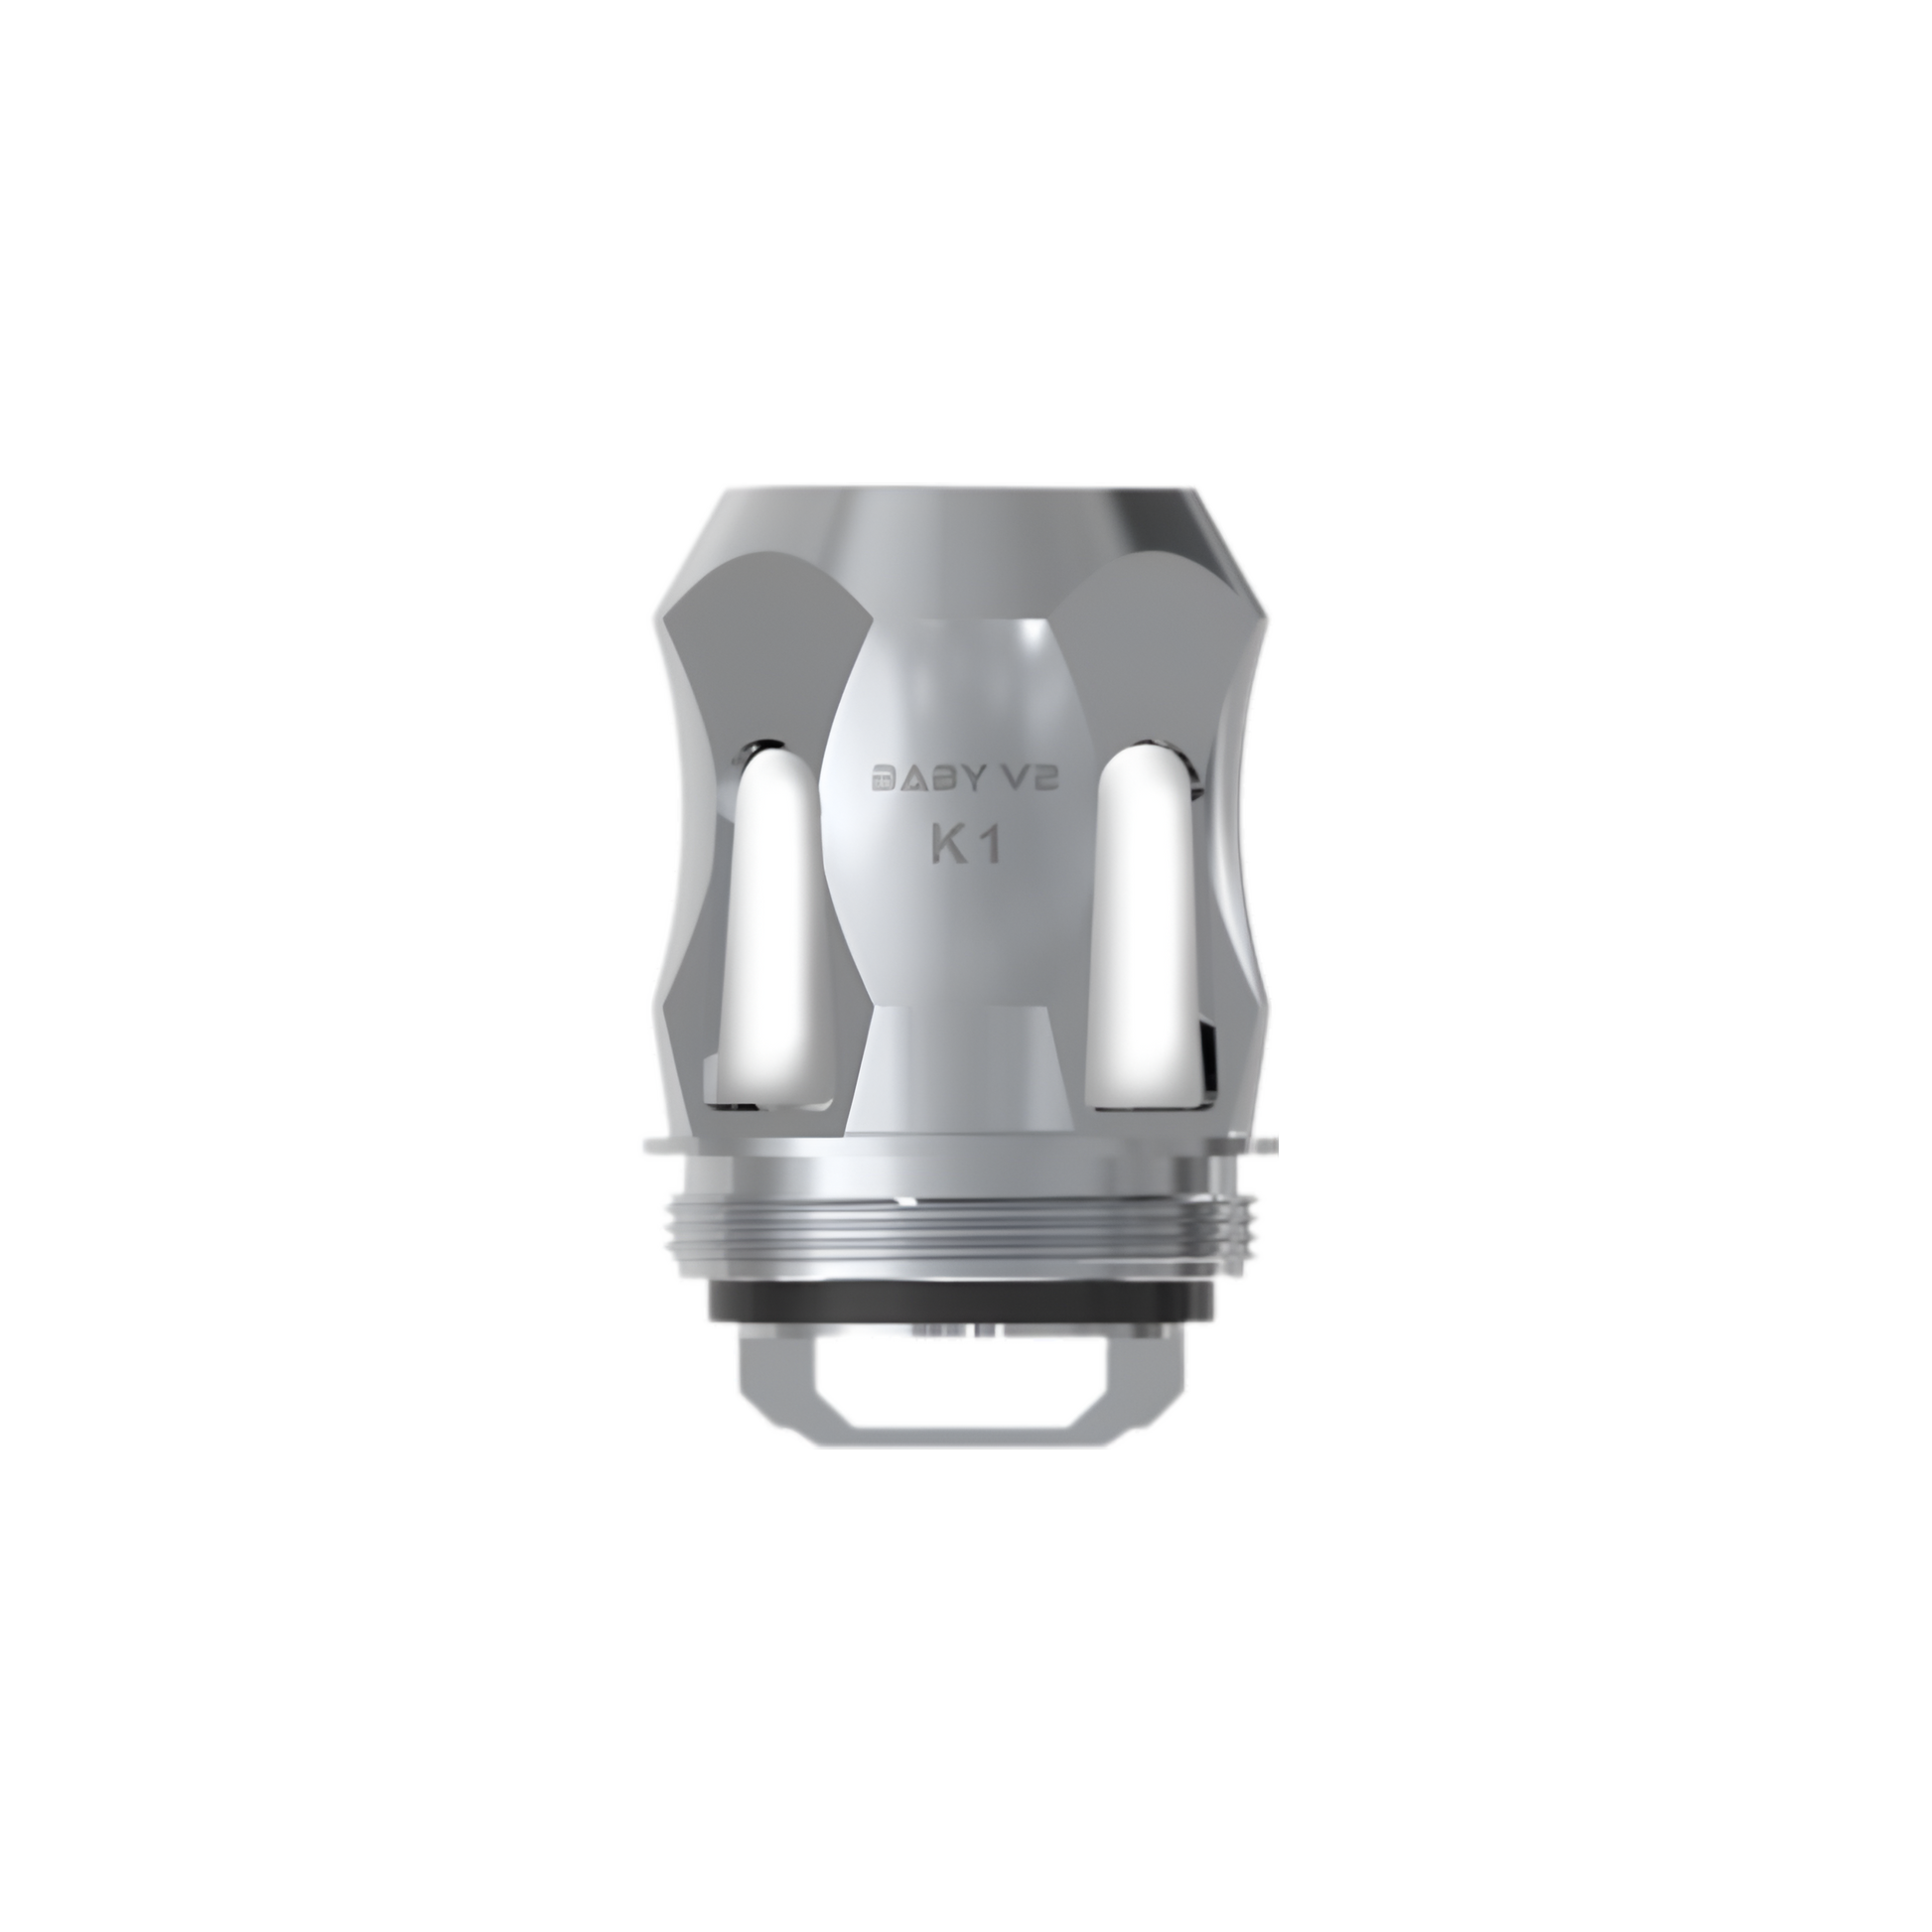 Smok Baby V2 Series Replacement Coils K1 Coil - 0.2 Ω  